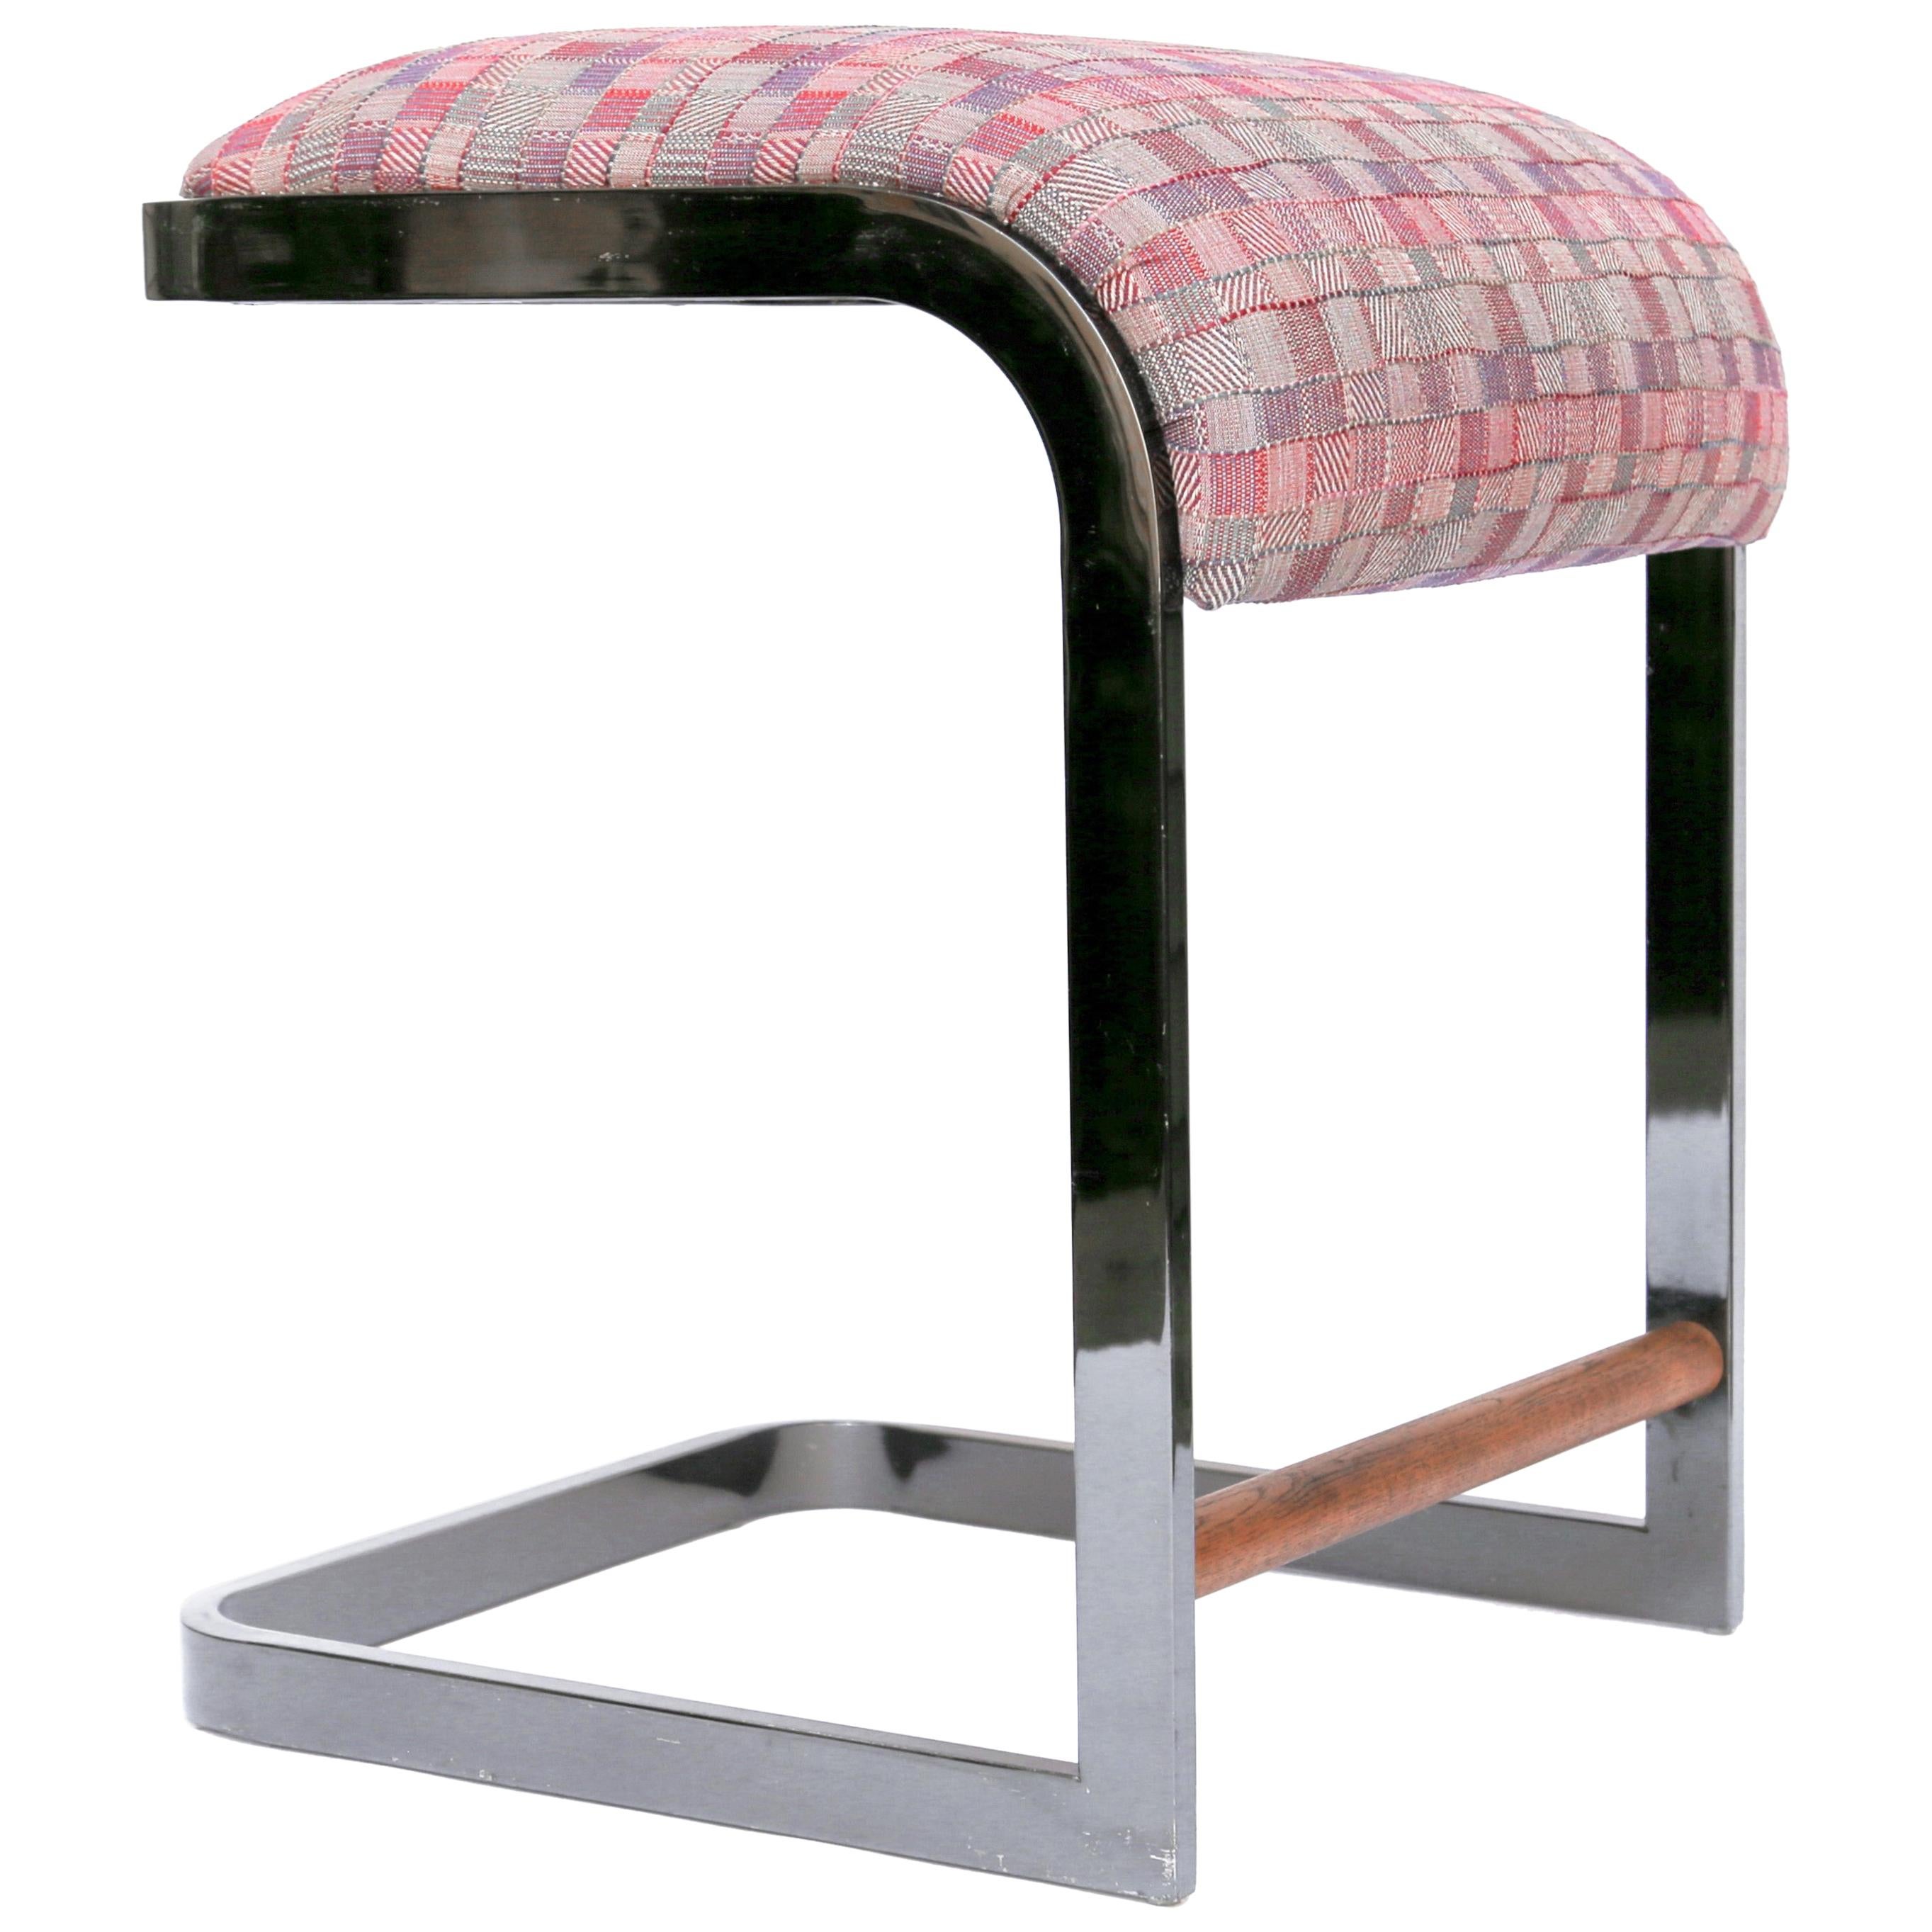 Cantilever Backless Chrome Stool by D I A, Purple Upholstery